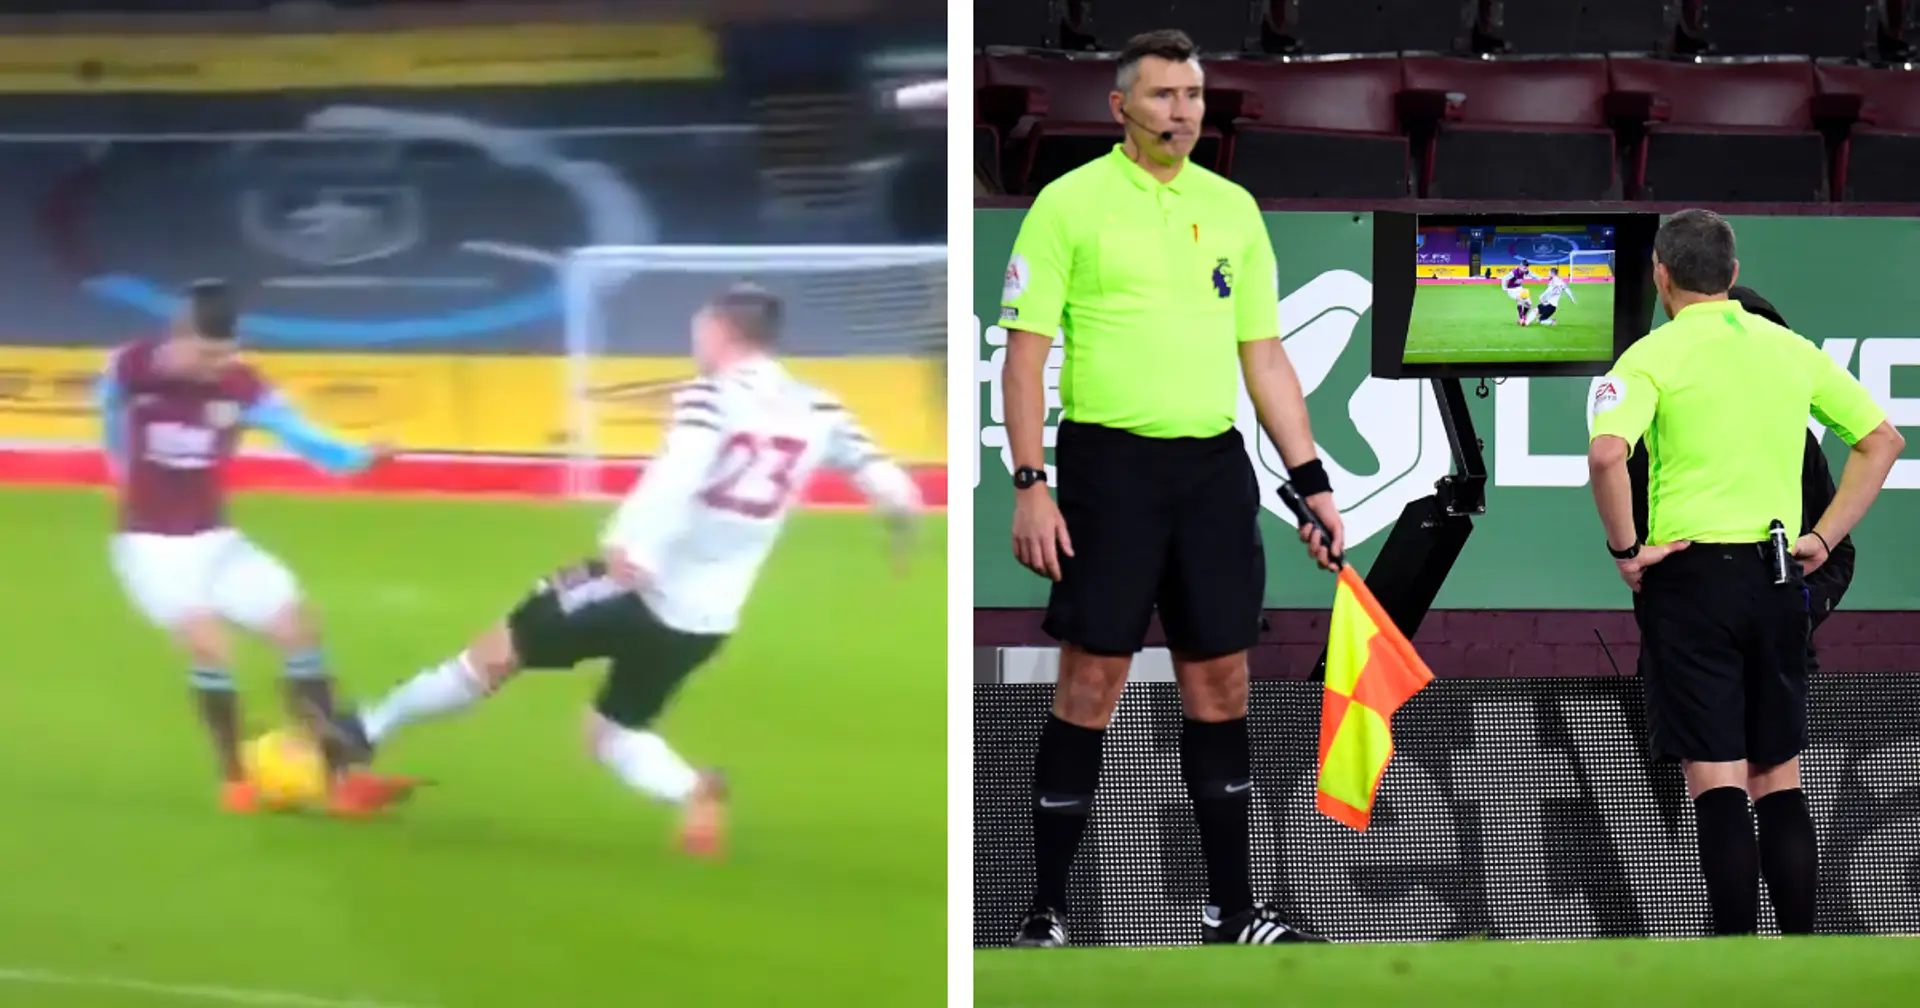 VAR cancels Man United's dangerous free-kick — and somehow books Luke Shaw for winning the ball